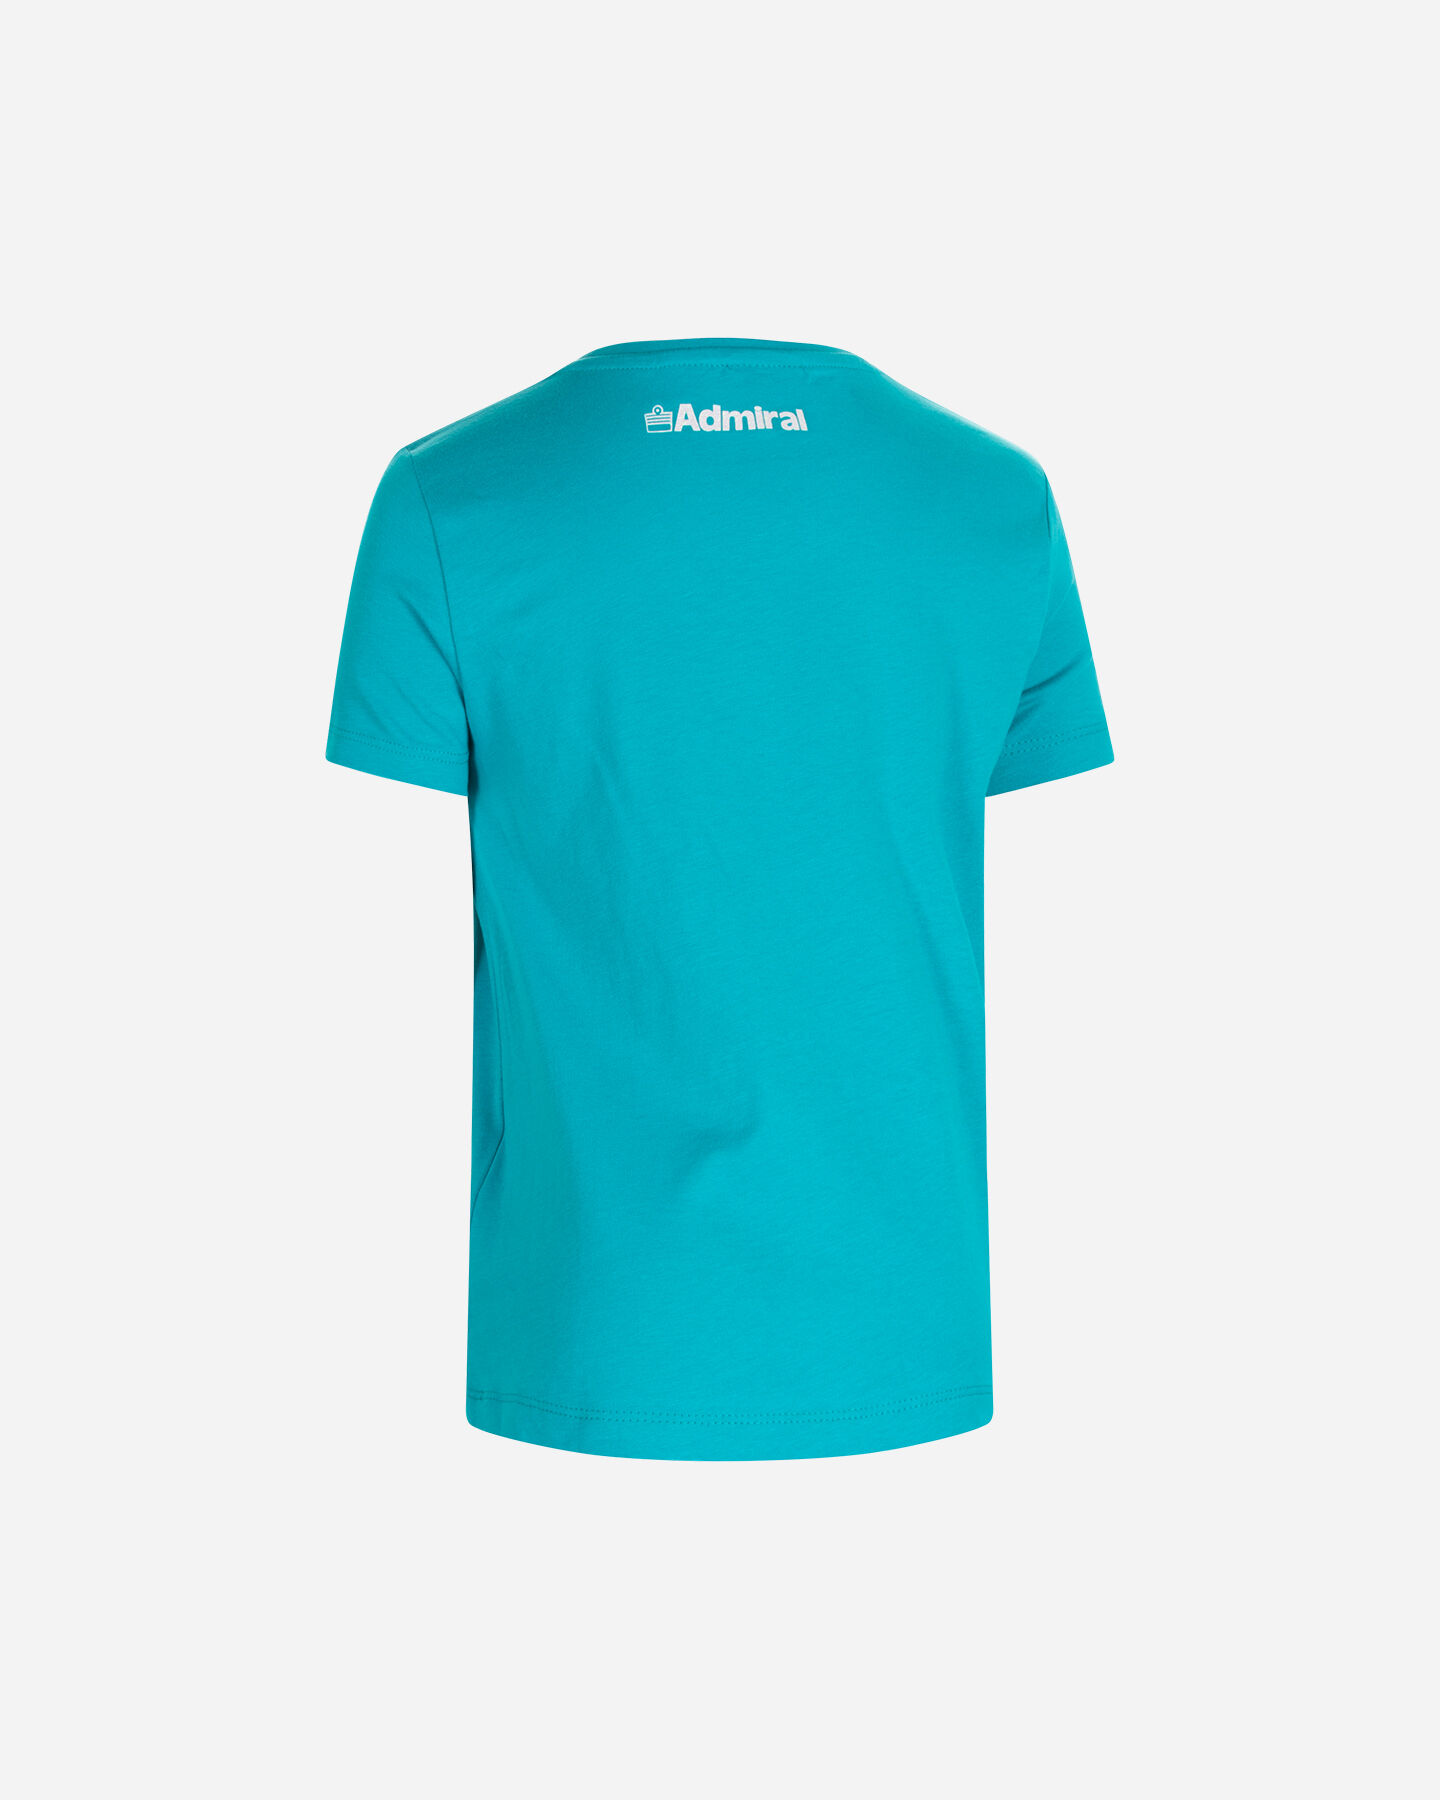  T-Shirt ADMIRAL BASIC SPORT JR S4119985|715|4A scatto 1